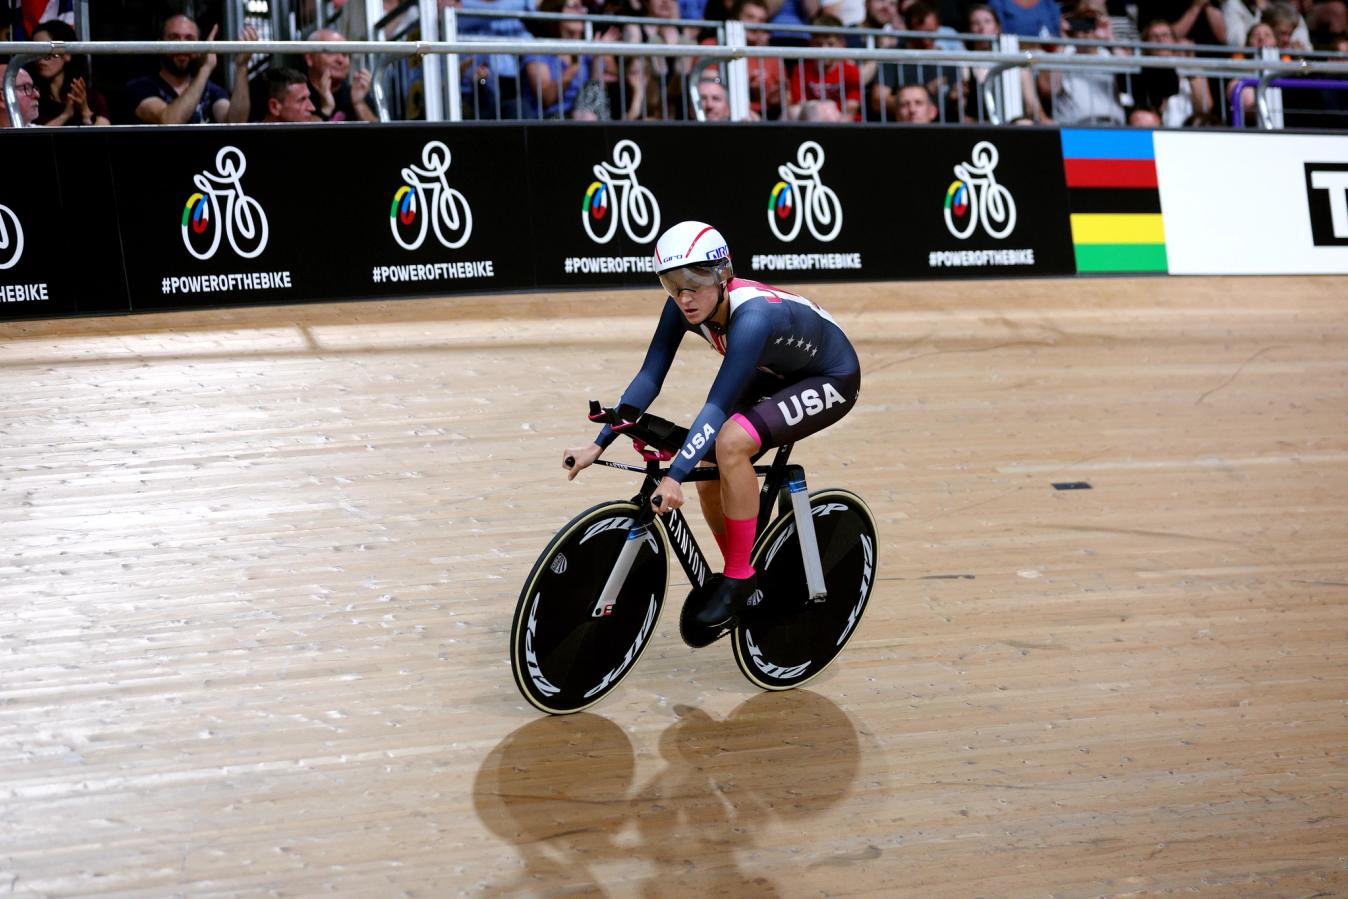 Chloé Dygert has now won four of the last seven world titles in the Women’s Elite Individual Pursuit. 